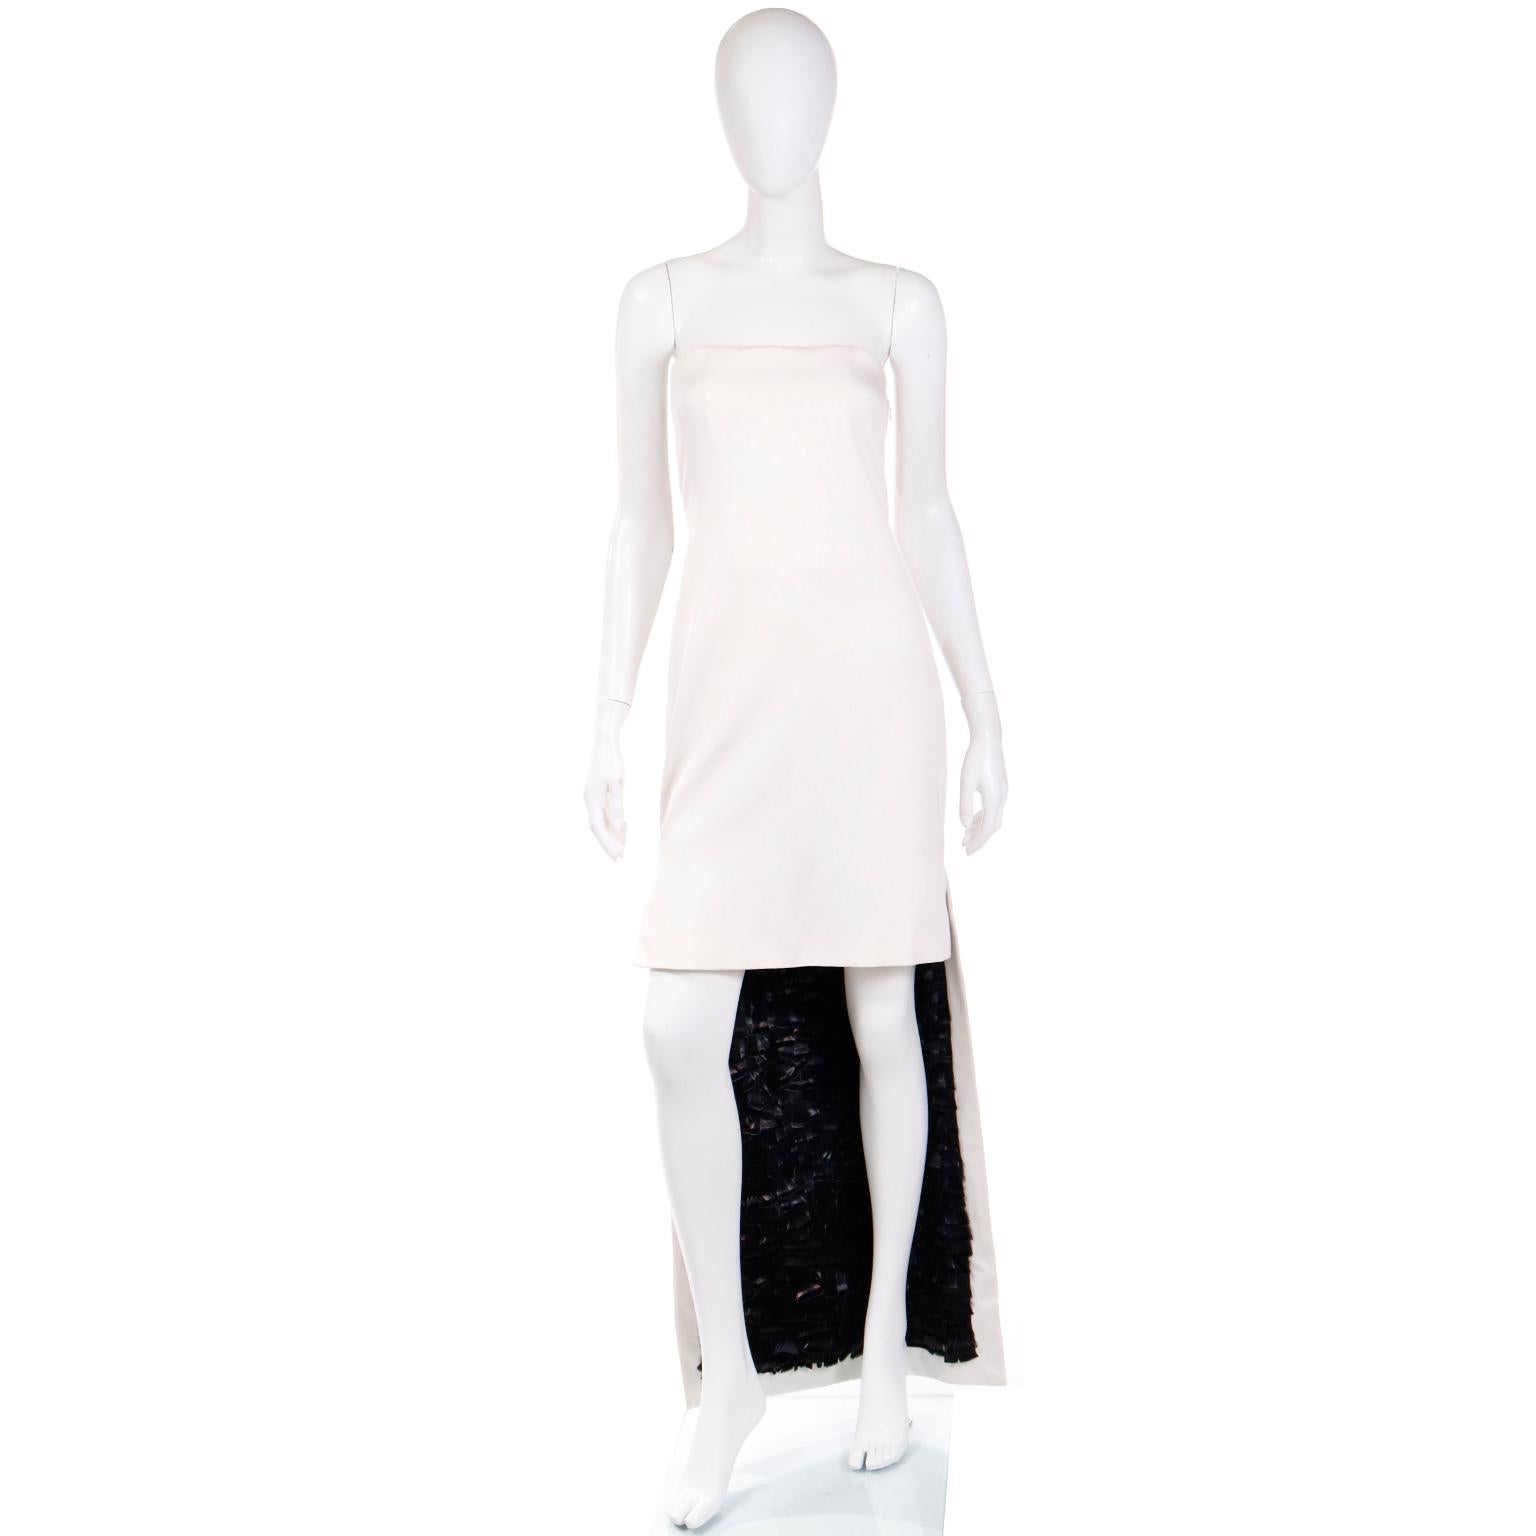 This is a stunning vintage Yves Saint Laurent ivory silk strapless evening dress designed by Tom Ford for the Spring/Summer 2001 YSL Rive Gauche collection. This incredible dress has a unique high-low style, fitting above the knee in front, with a